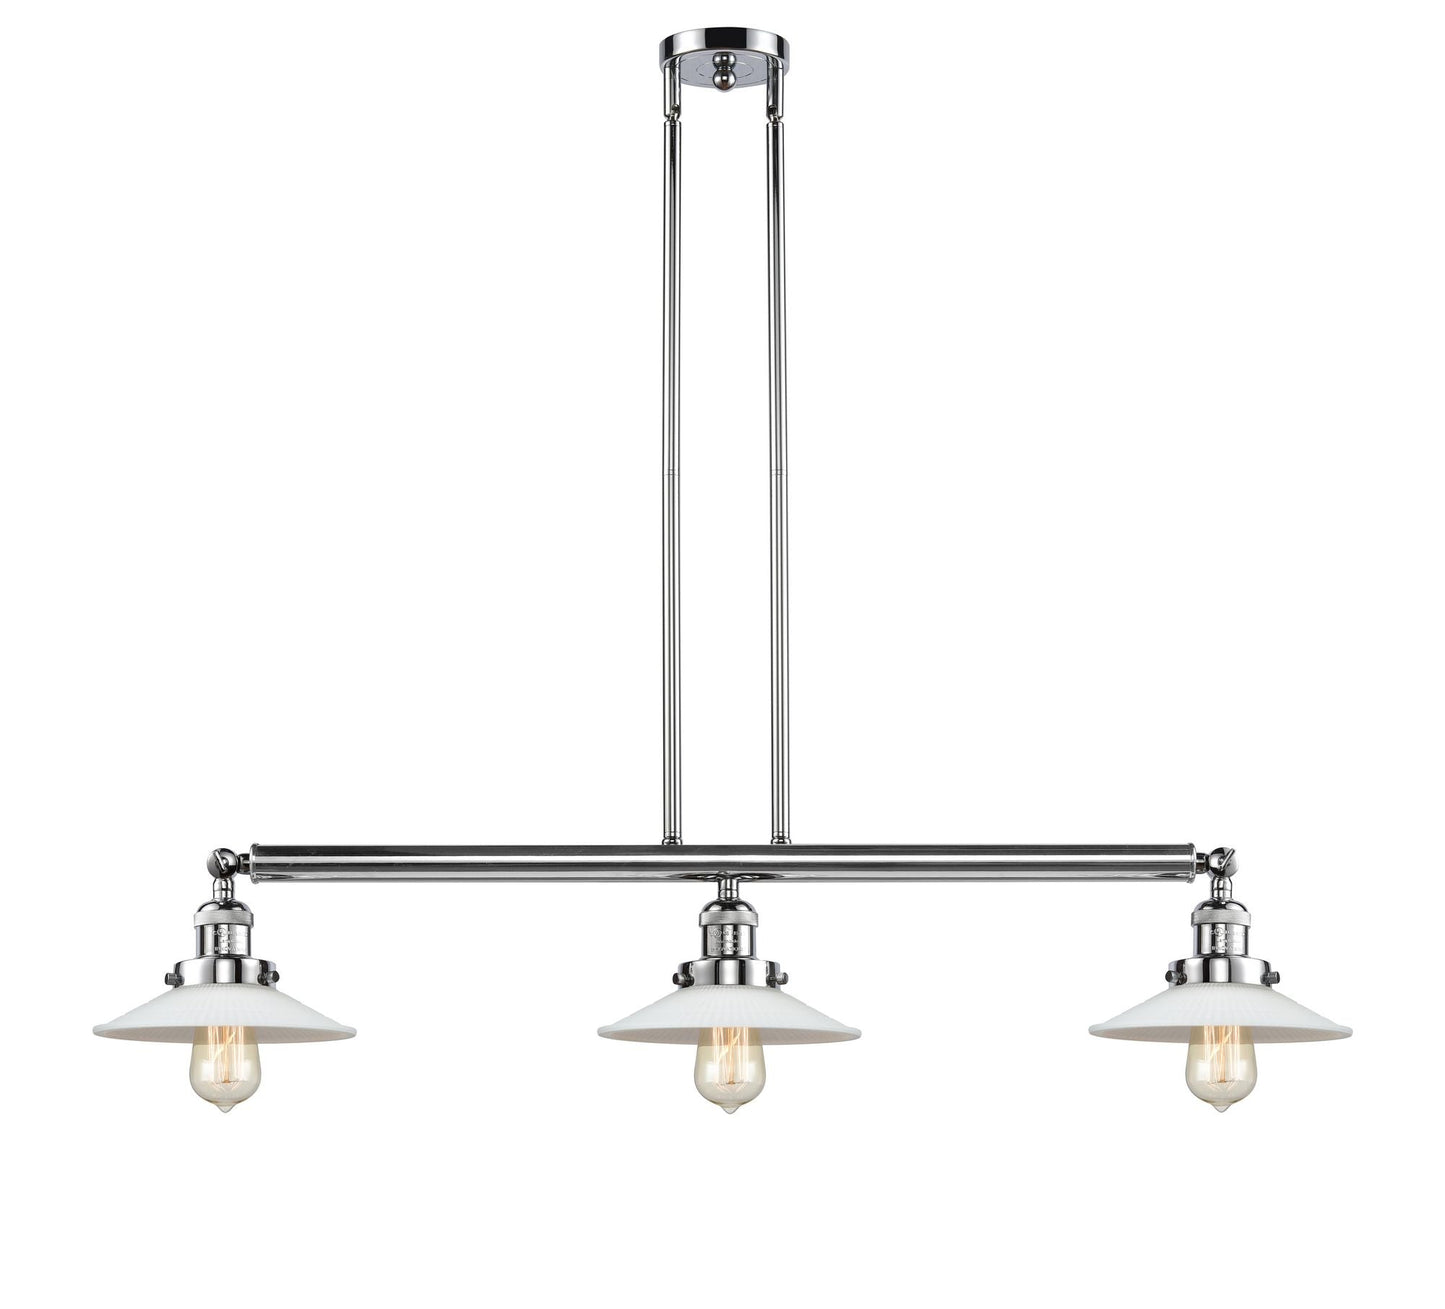 213-PN-G1 3-Light 41" Polished Nickel Island Light - White Halophane Glass - LED Bulb - Dimmensions: 41 x 8.5 x 8<br>Minimum Height : 16.25<br>Maximum Height : 40.25 - Sloped Ceiling Compatible: Yes